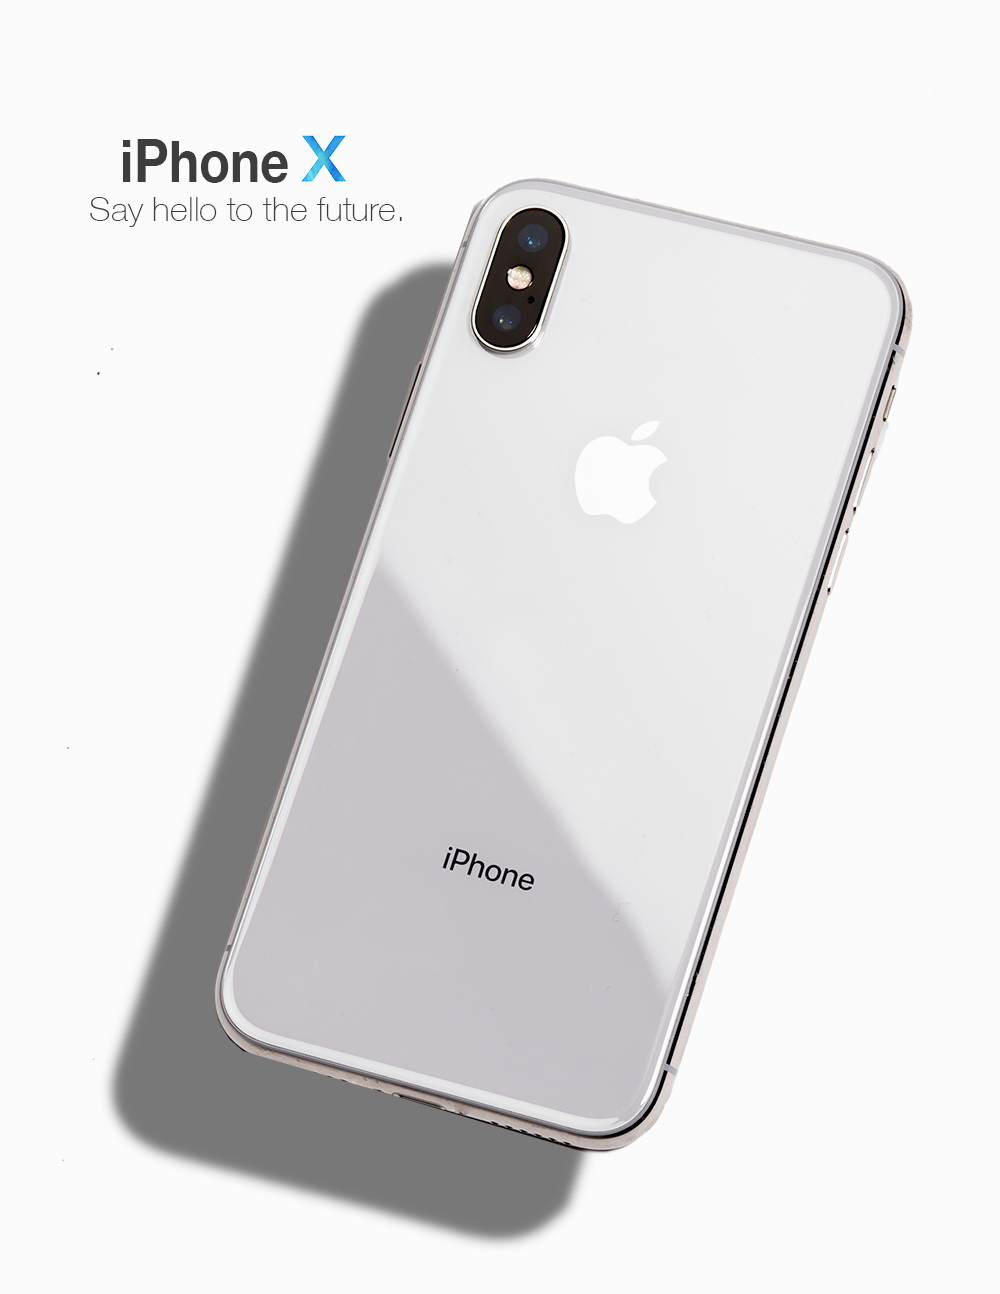 apple iphone iPhone x Product Photography Advertising Photography Commercial Photography Commercial photographer technology advertisment tech ad tech photography